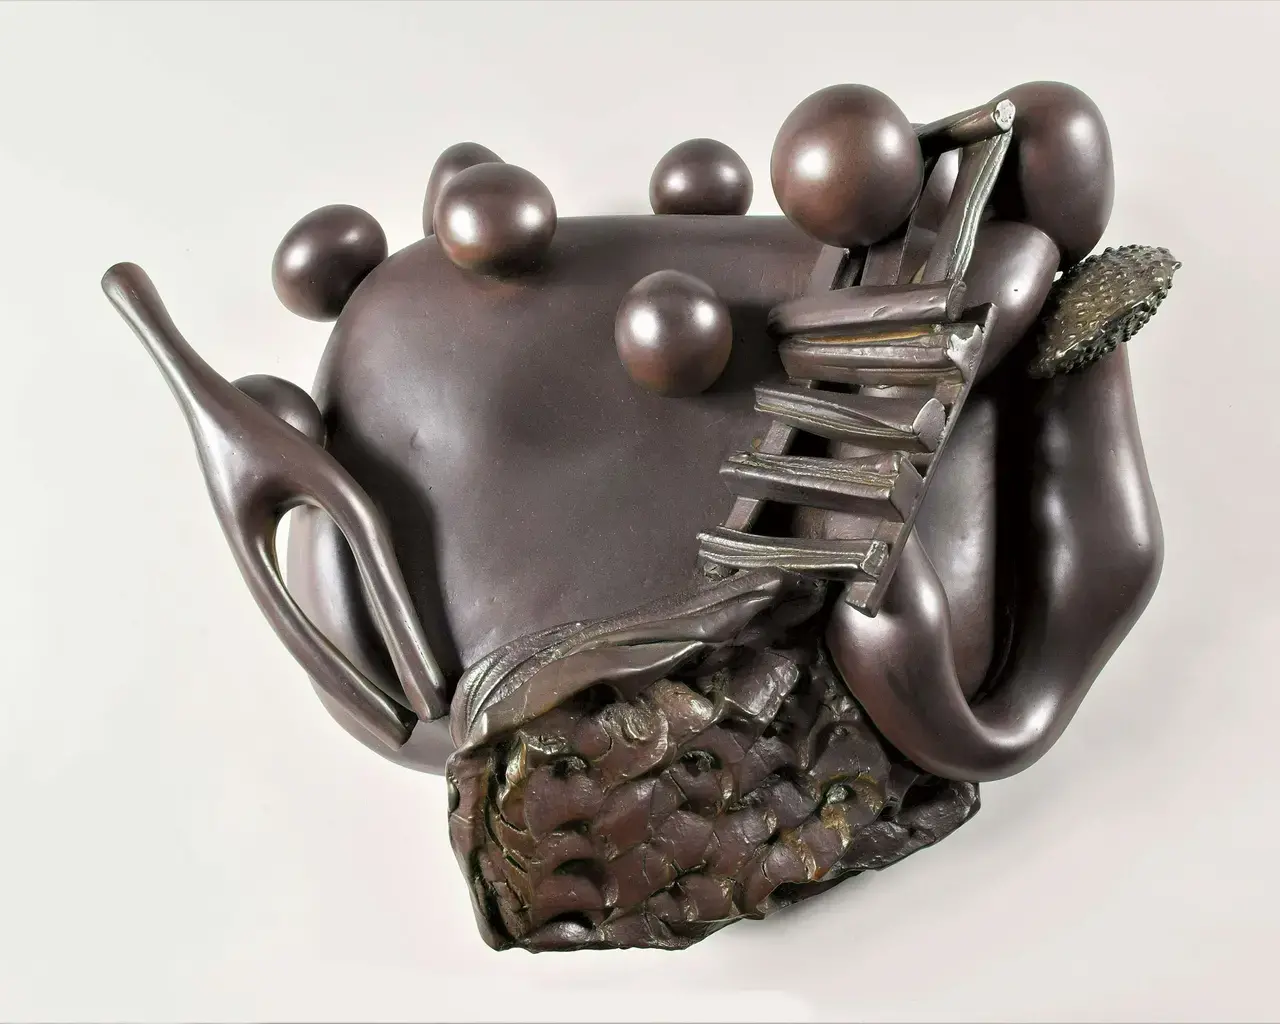 A clay sculpture covered in brown glaze by Pew Fellow Syd Carpenter.